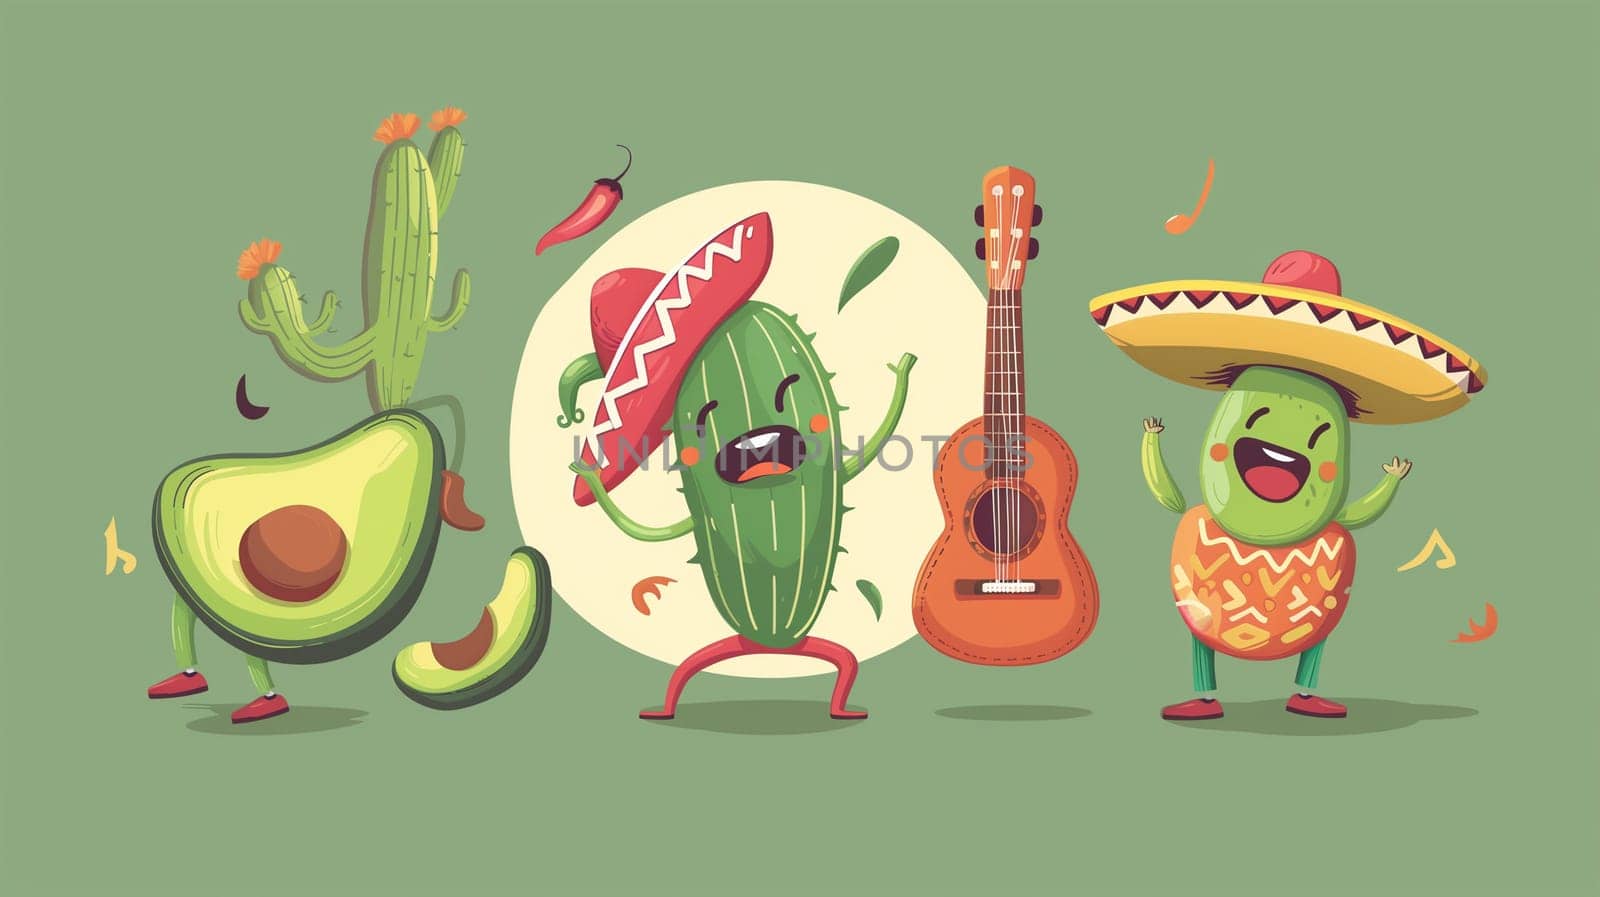 Cartoon characters of an avocado, jalapeno, and cactus celebrate Cinco de Mayo with a guitar and sombrero.